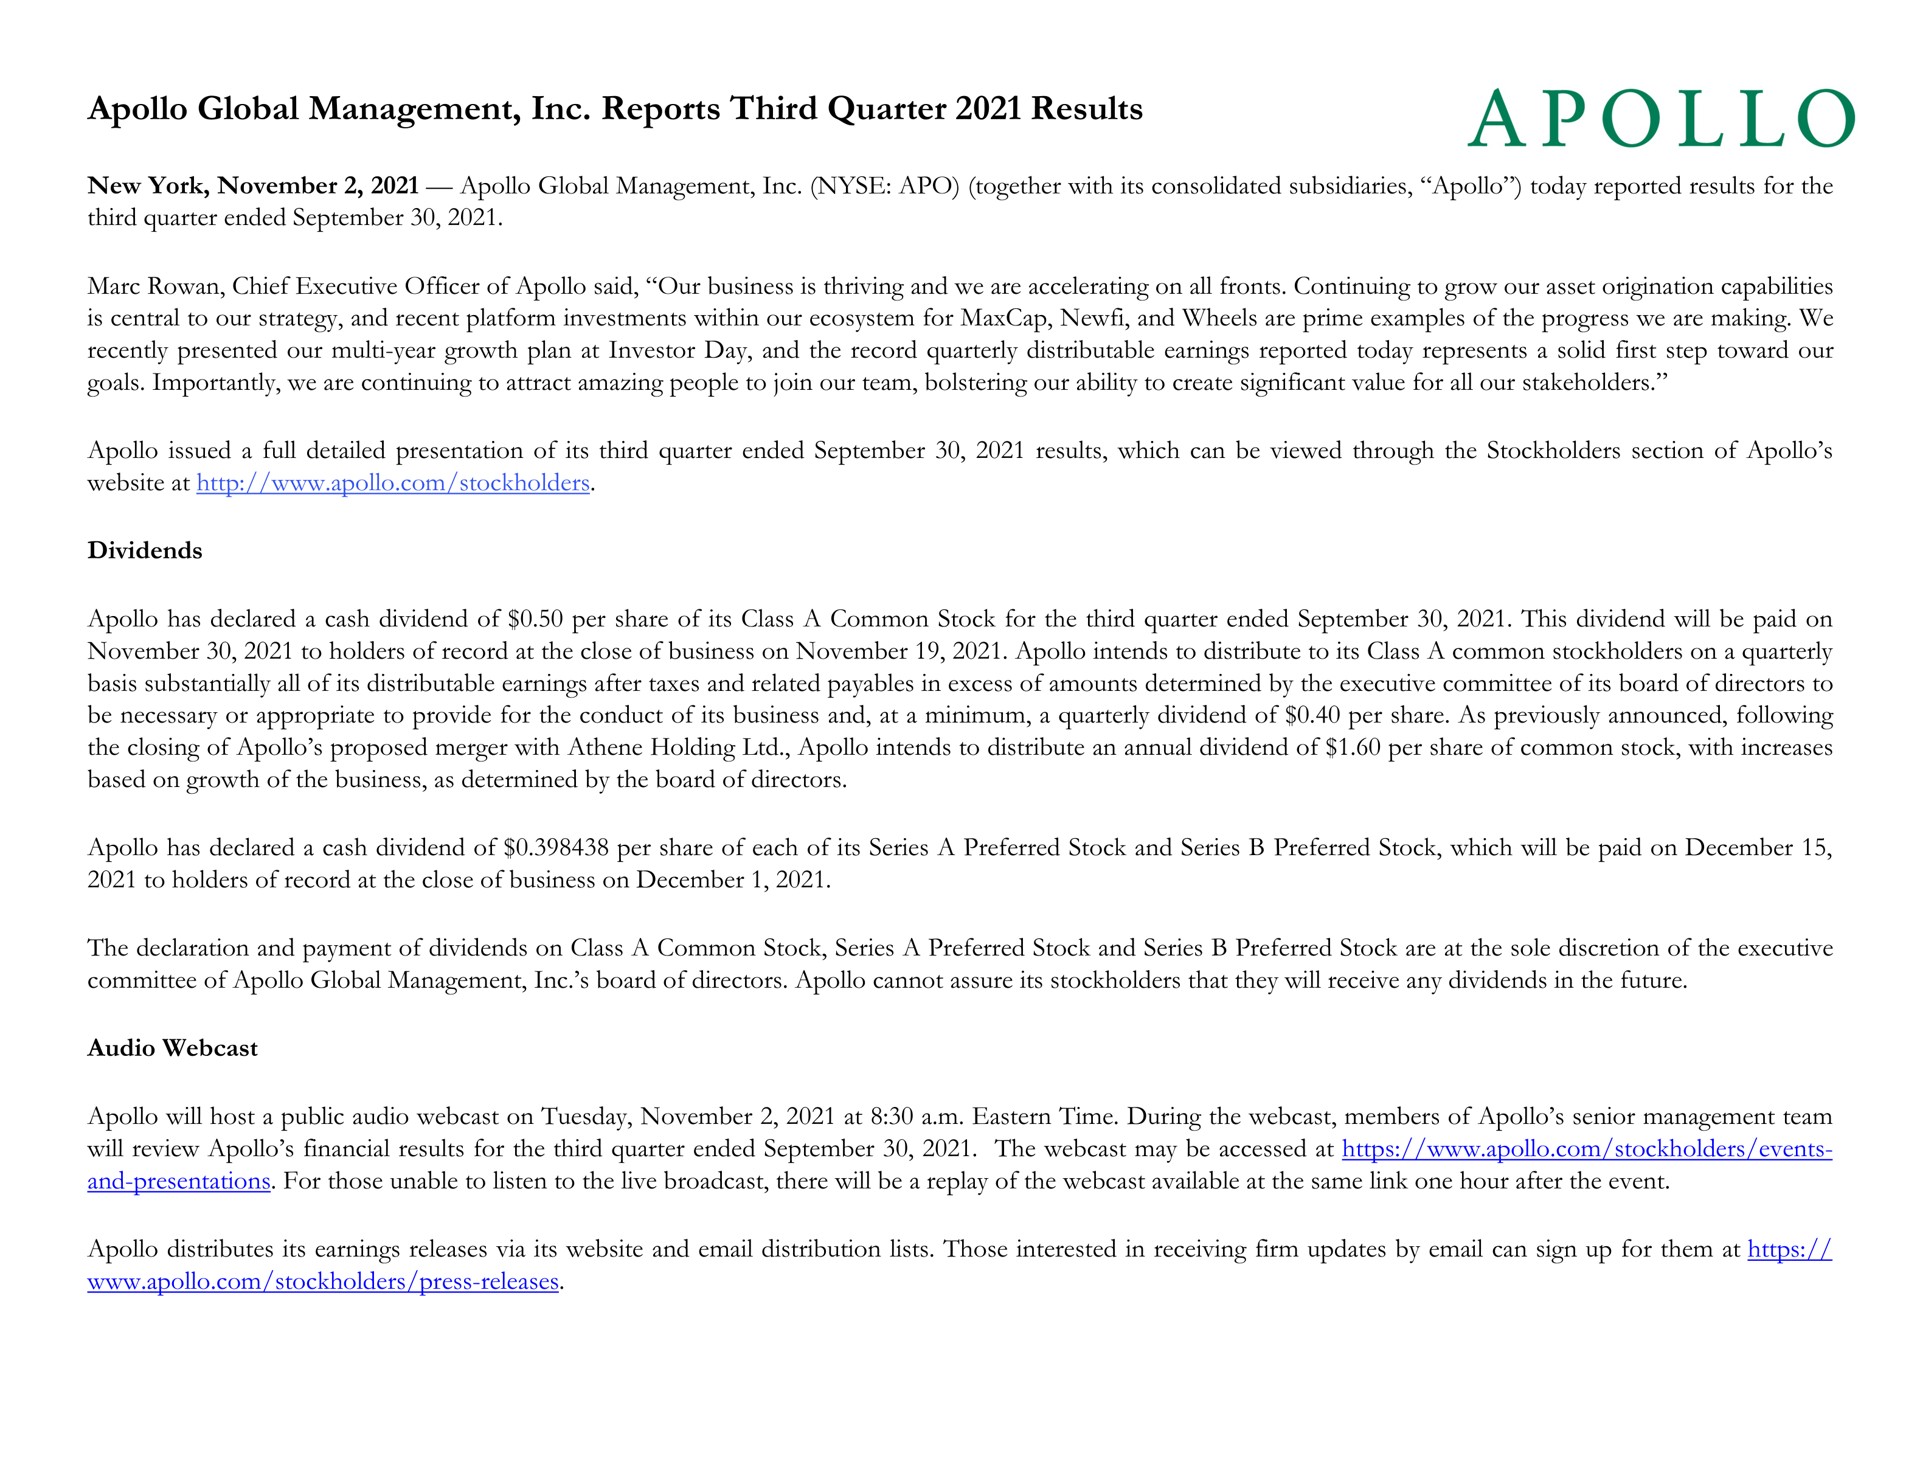 global management reports third quarter results a | Apollo Global Management